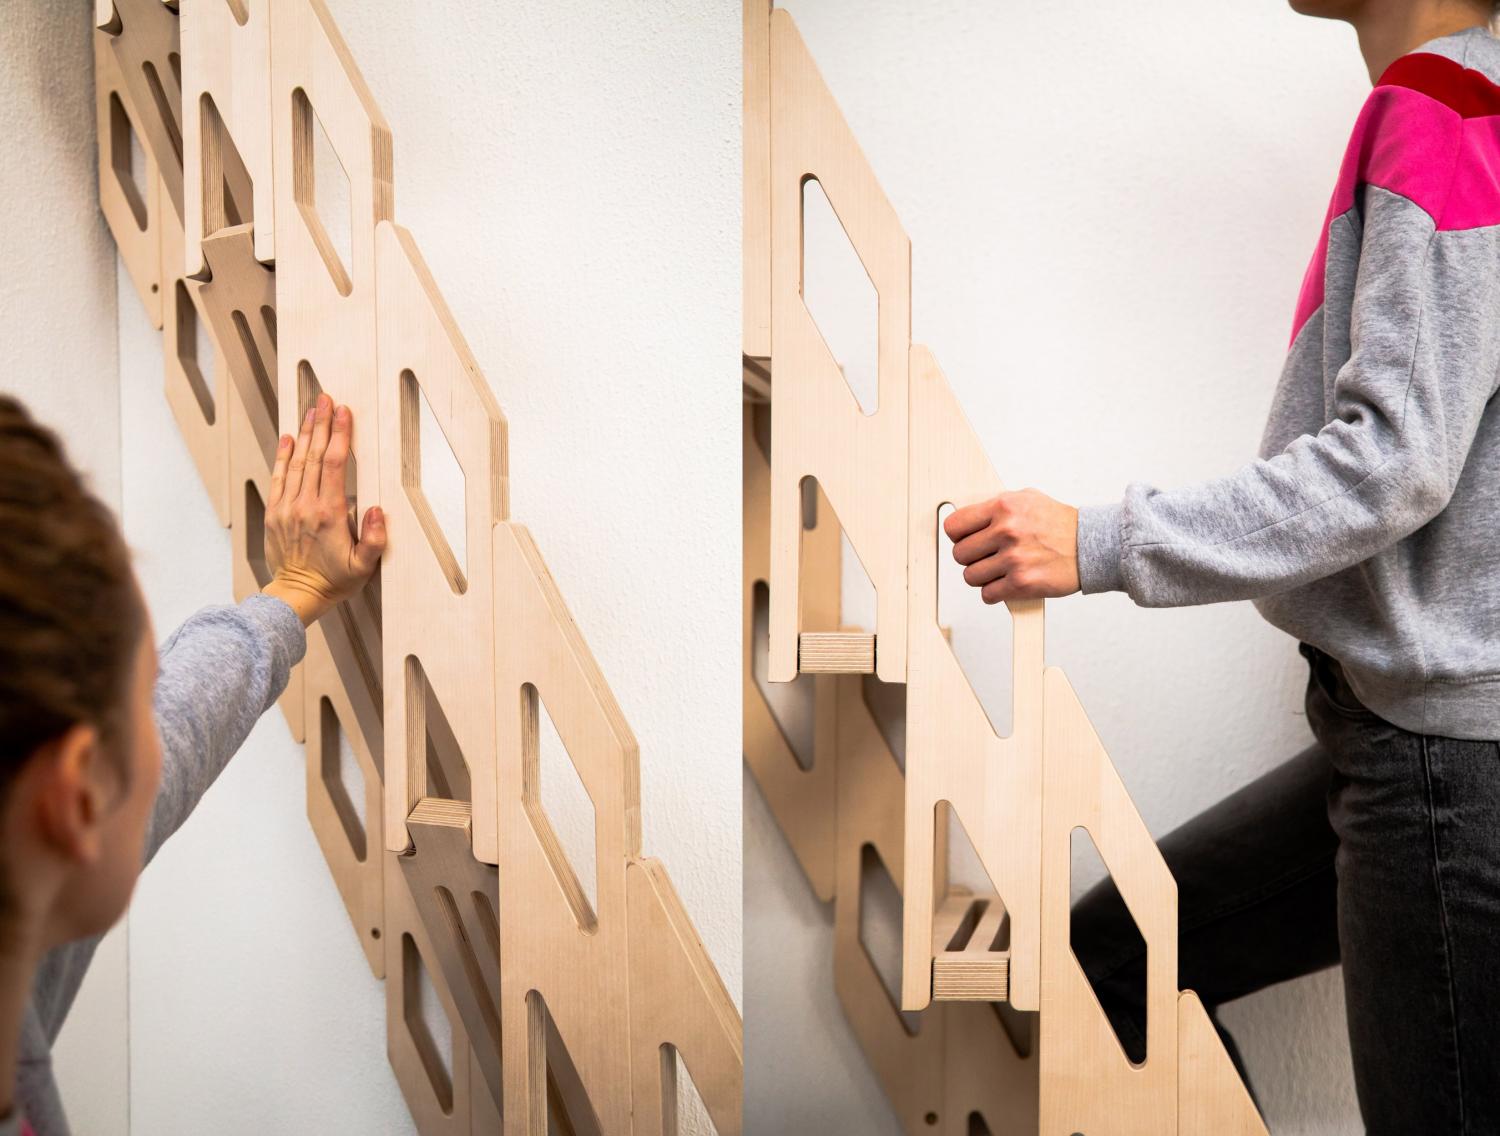 This Folding Staircase Is Ideal For Tiny Homes Or Loft Apartments